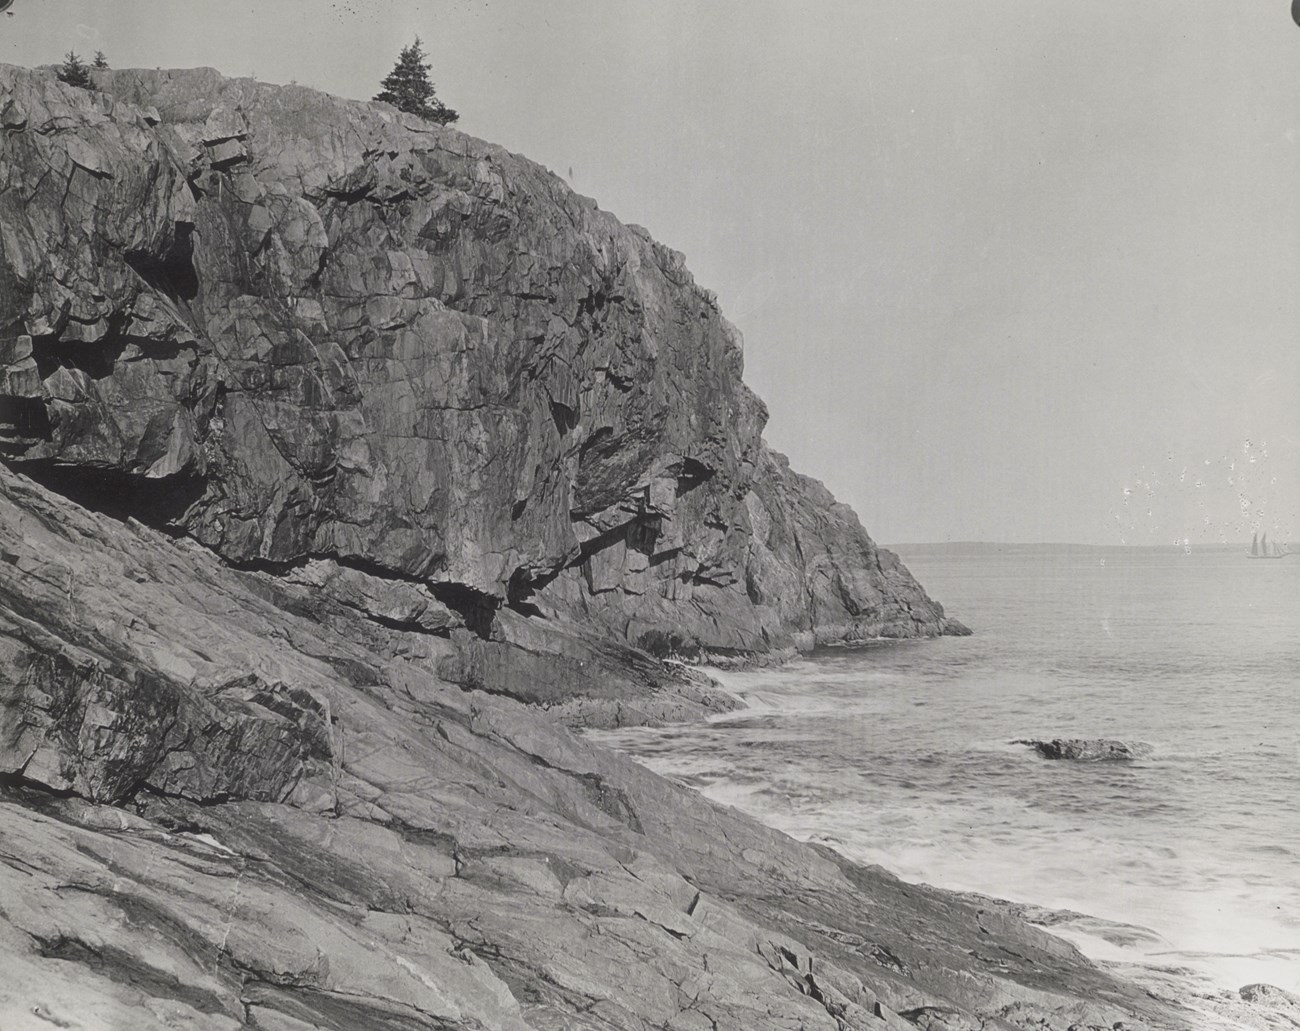 Black and white photo of a cliff and ocean